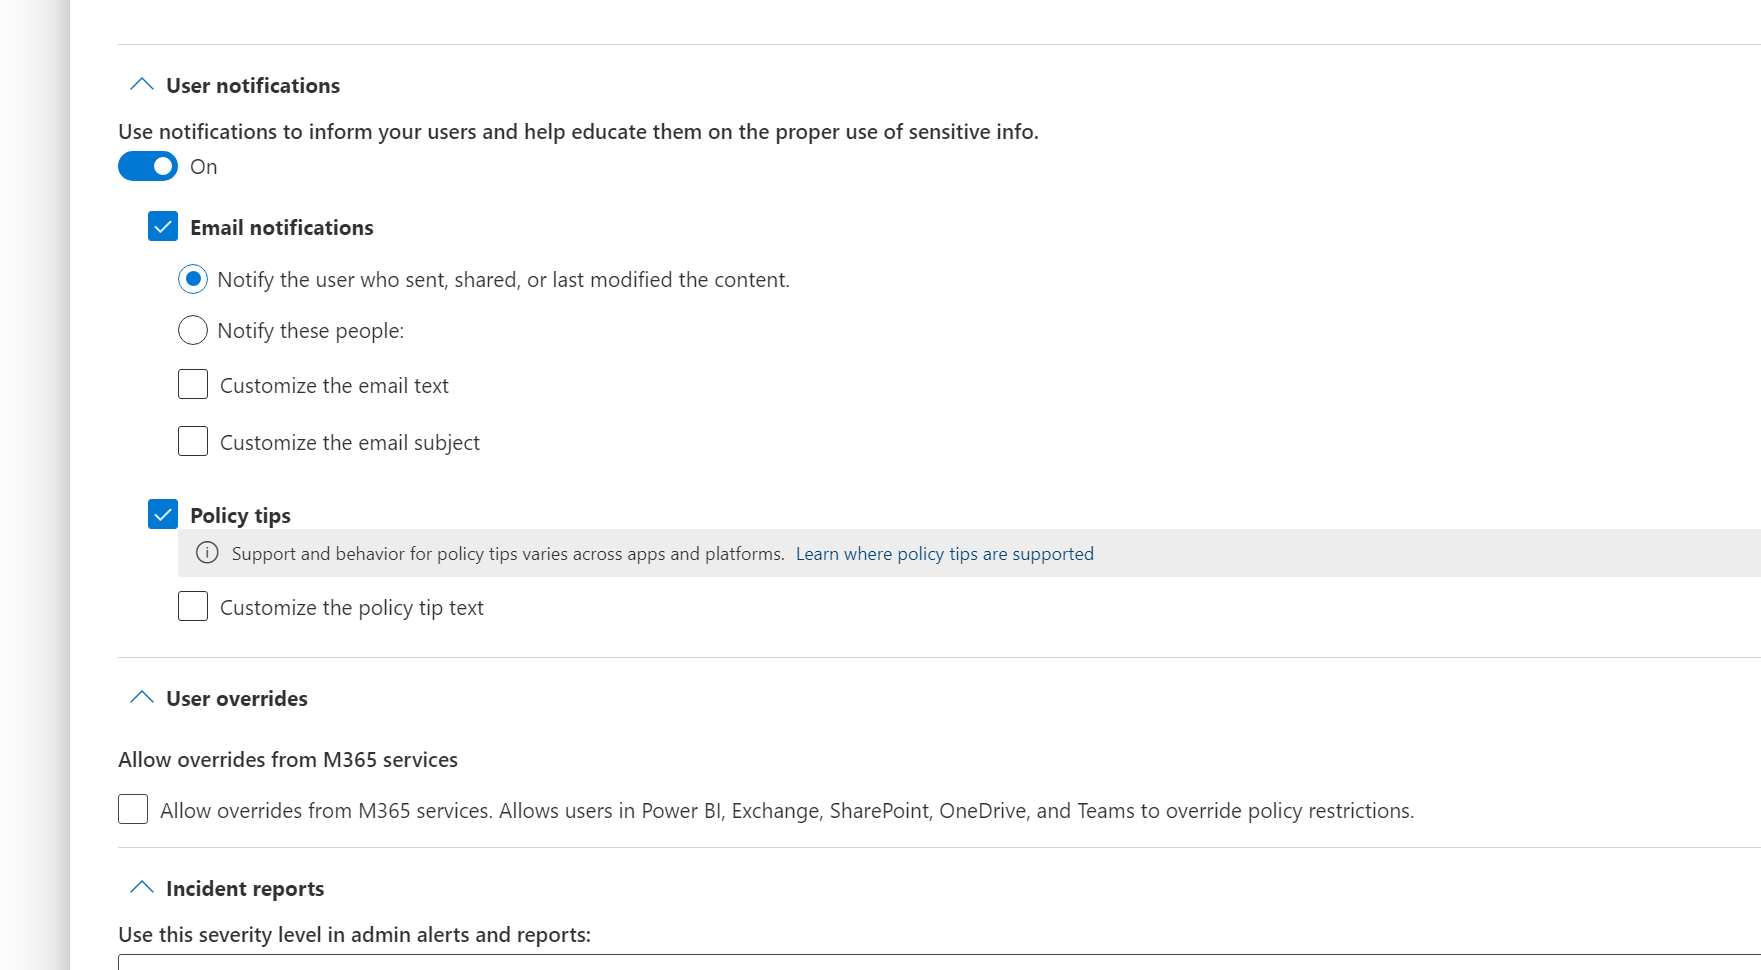 MC427148: Microsoft Purview Data Loss Prevention: Decoupling user notifications and policy tips